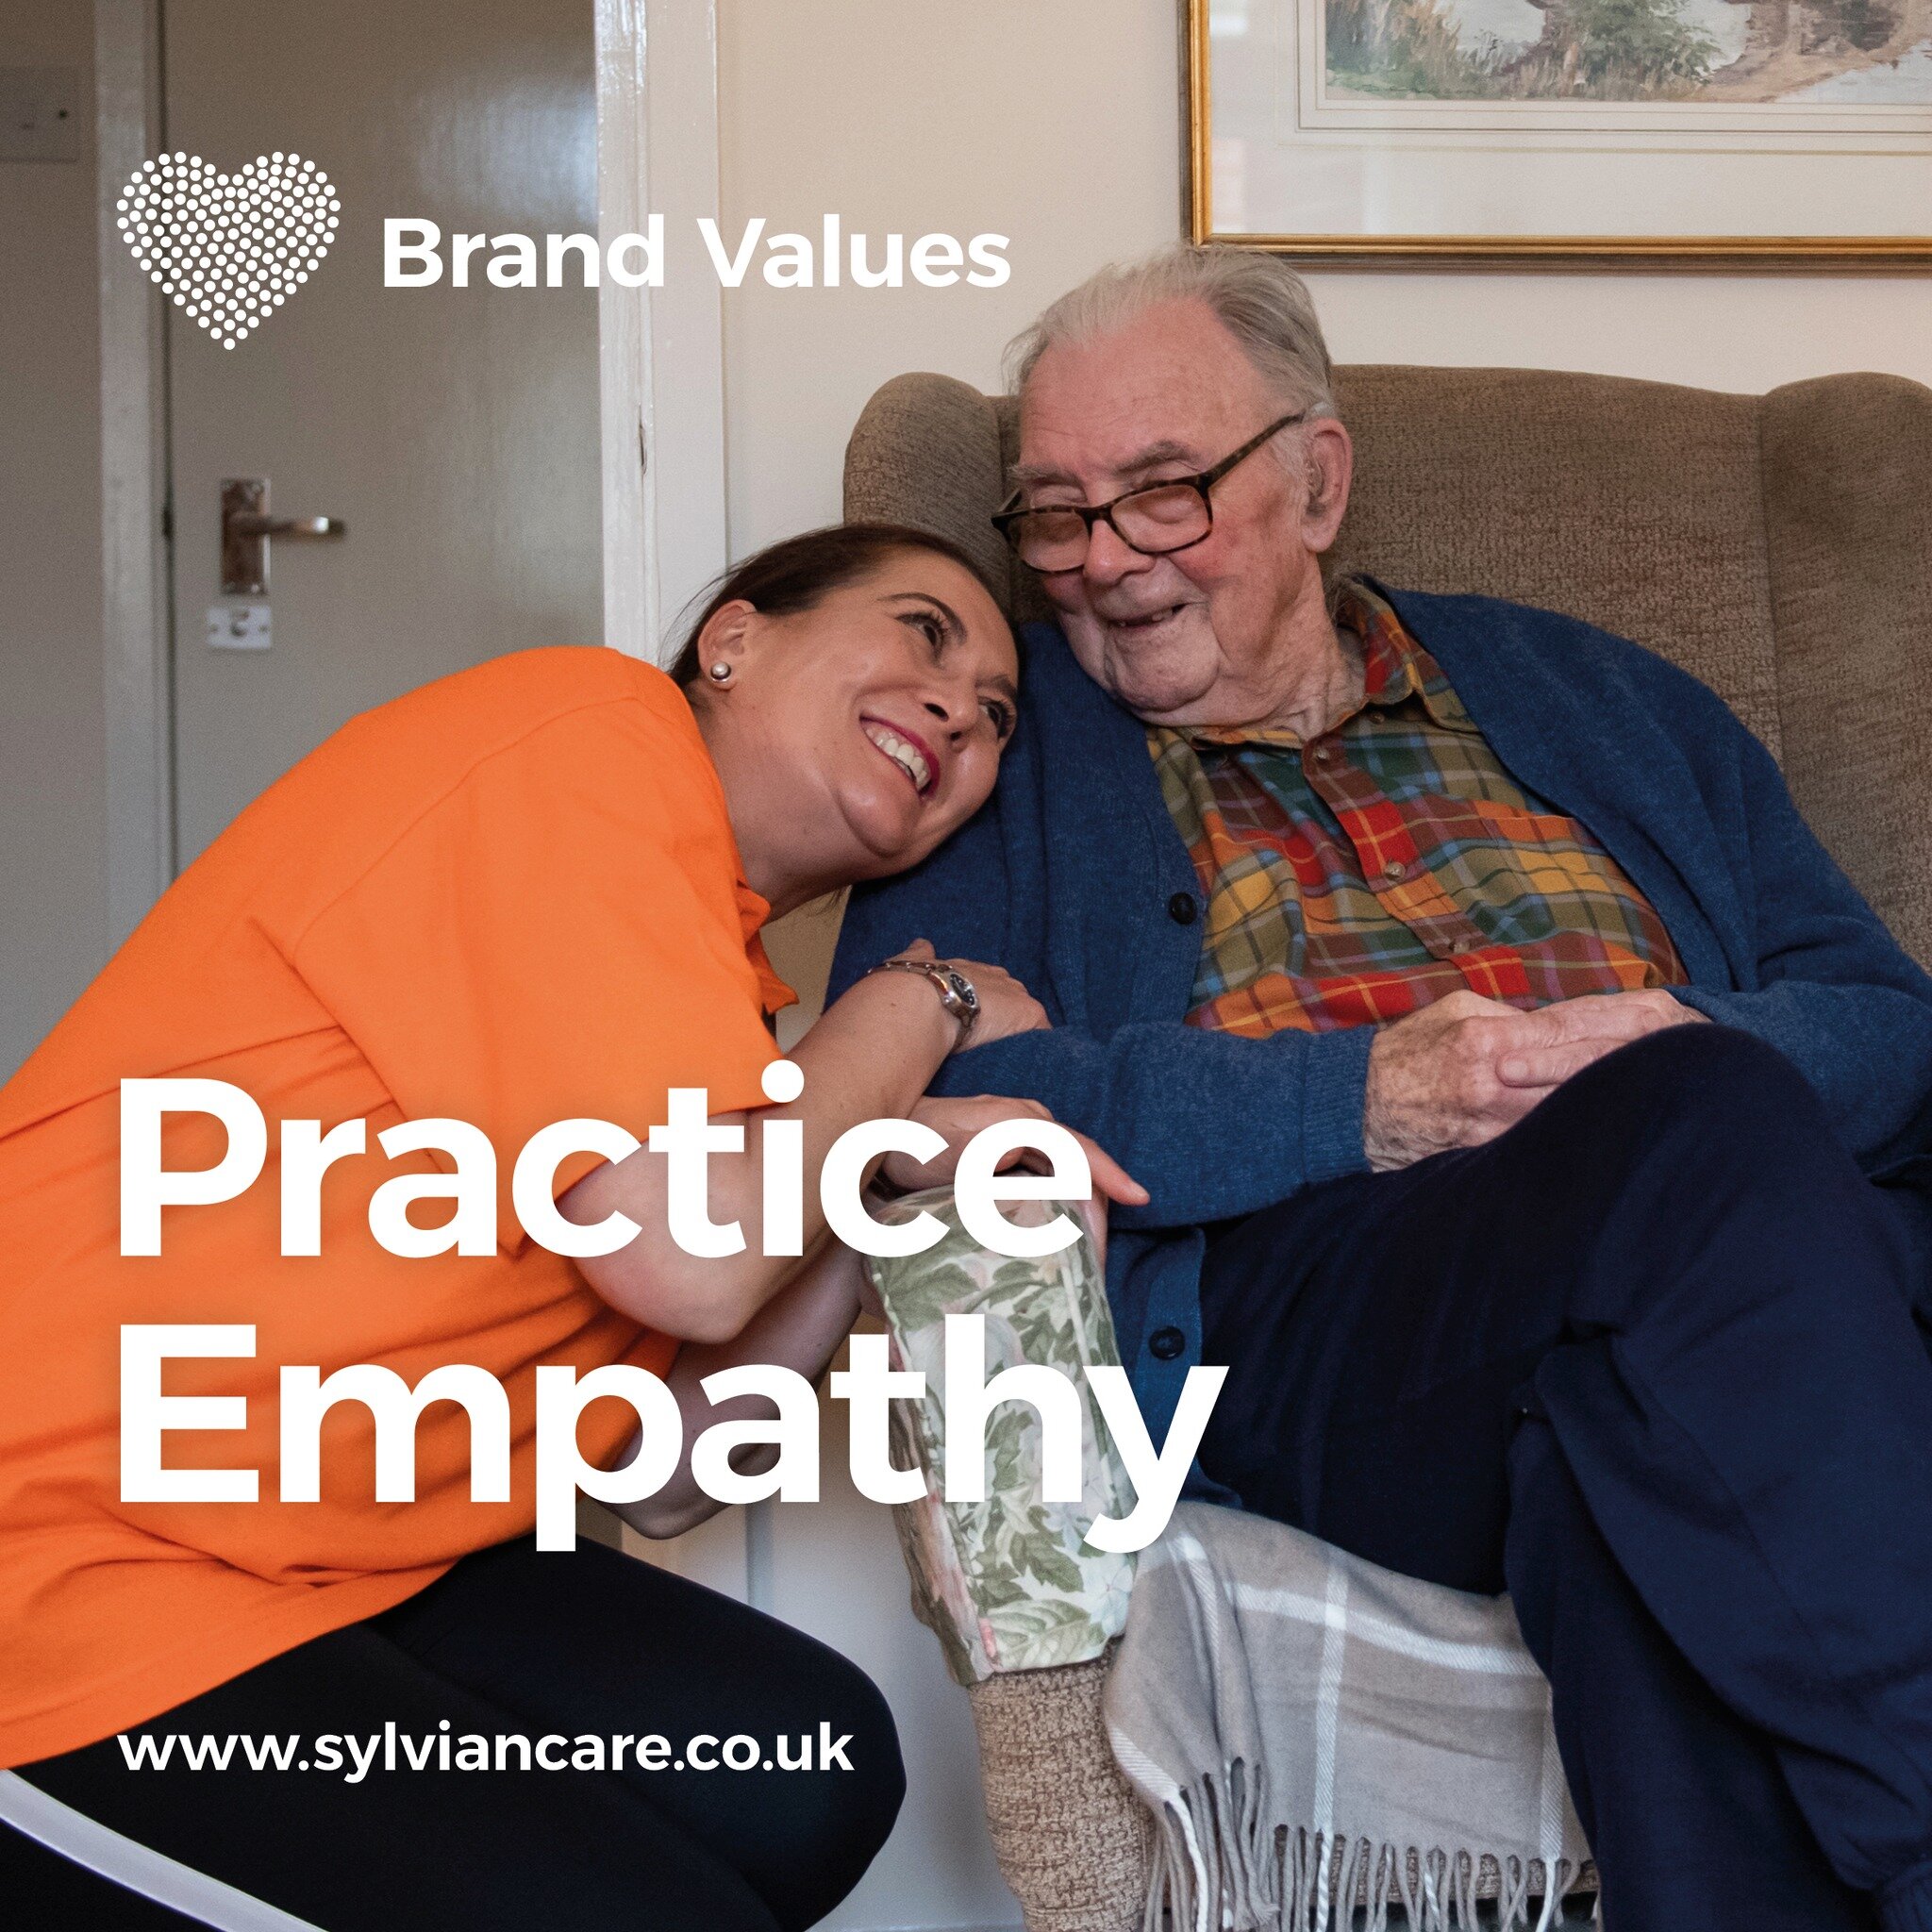 We demonstrate genuine empathy in every interaction by actively listening to our clients and their families, taking time to understand their feelings, and providing personalised care that addresses their unique needs and concerns. Our compassionate a